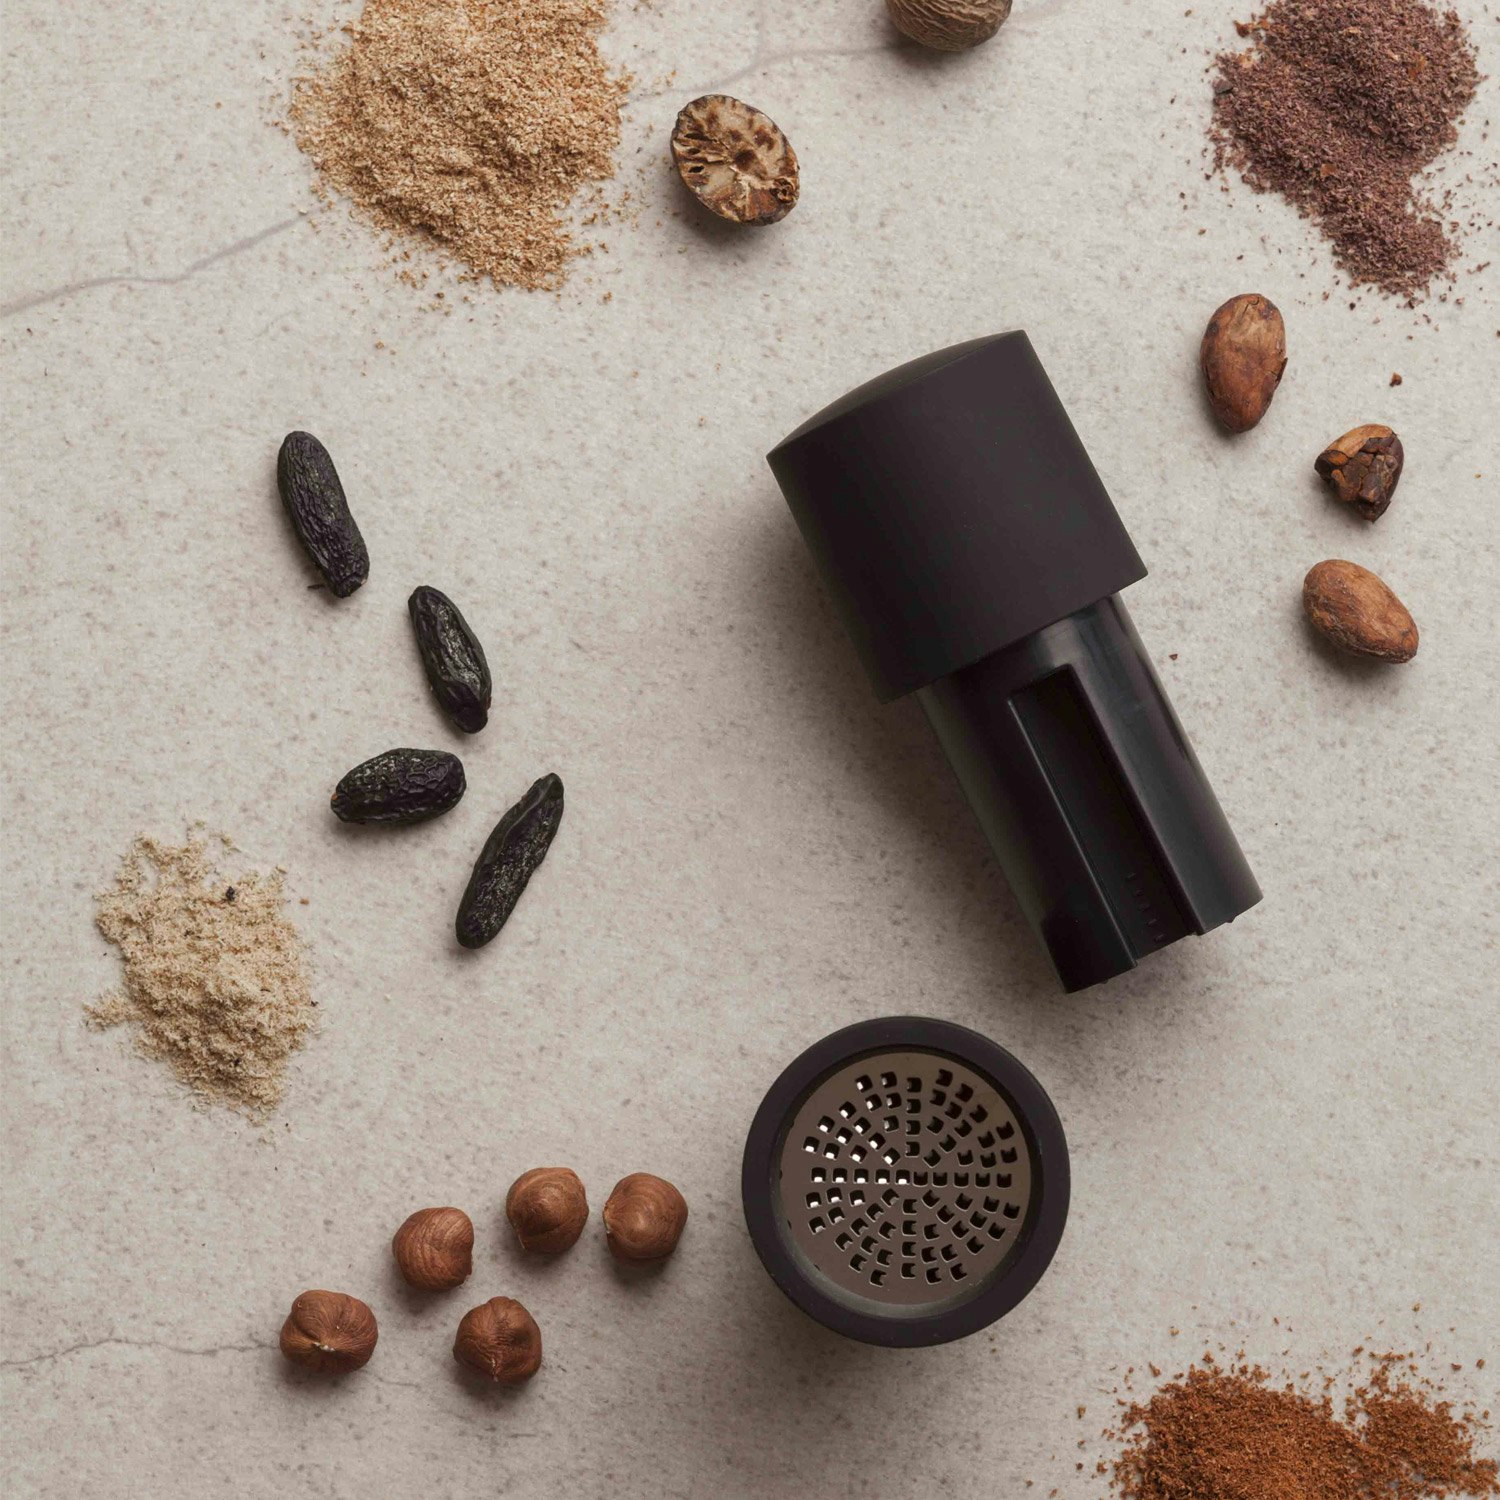 https://royaldesign.com/image/2/microplane-spice-mill-for-nutmeg-and-cinnamon-black-2